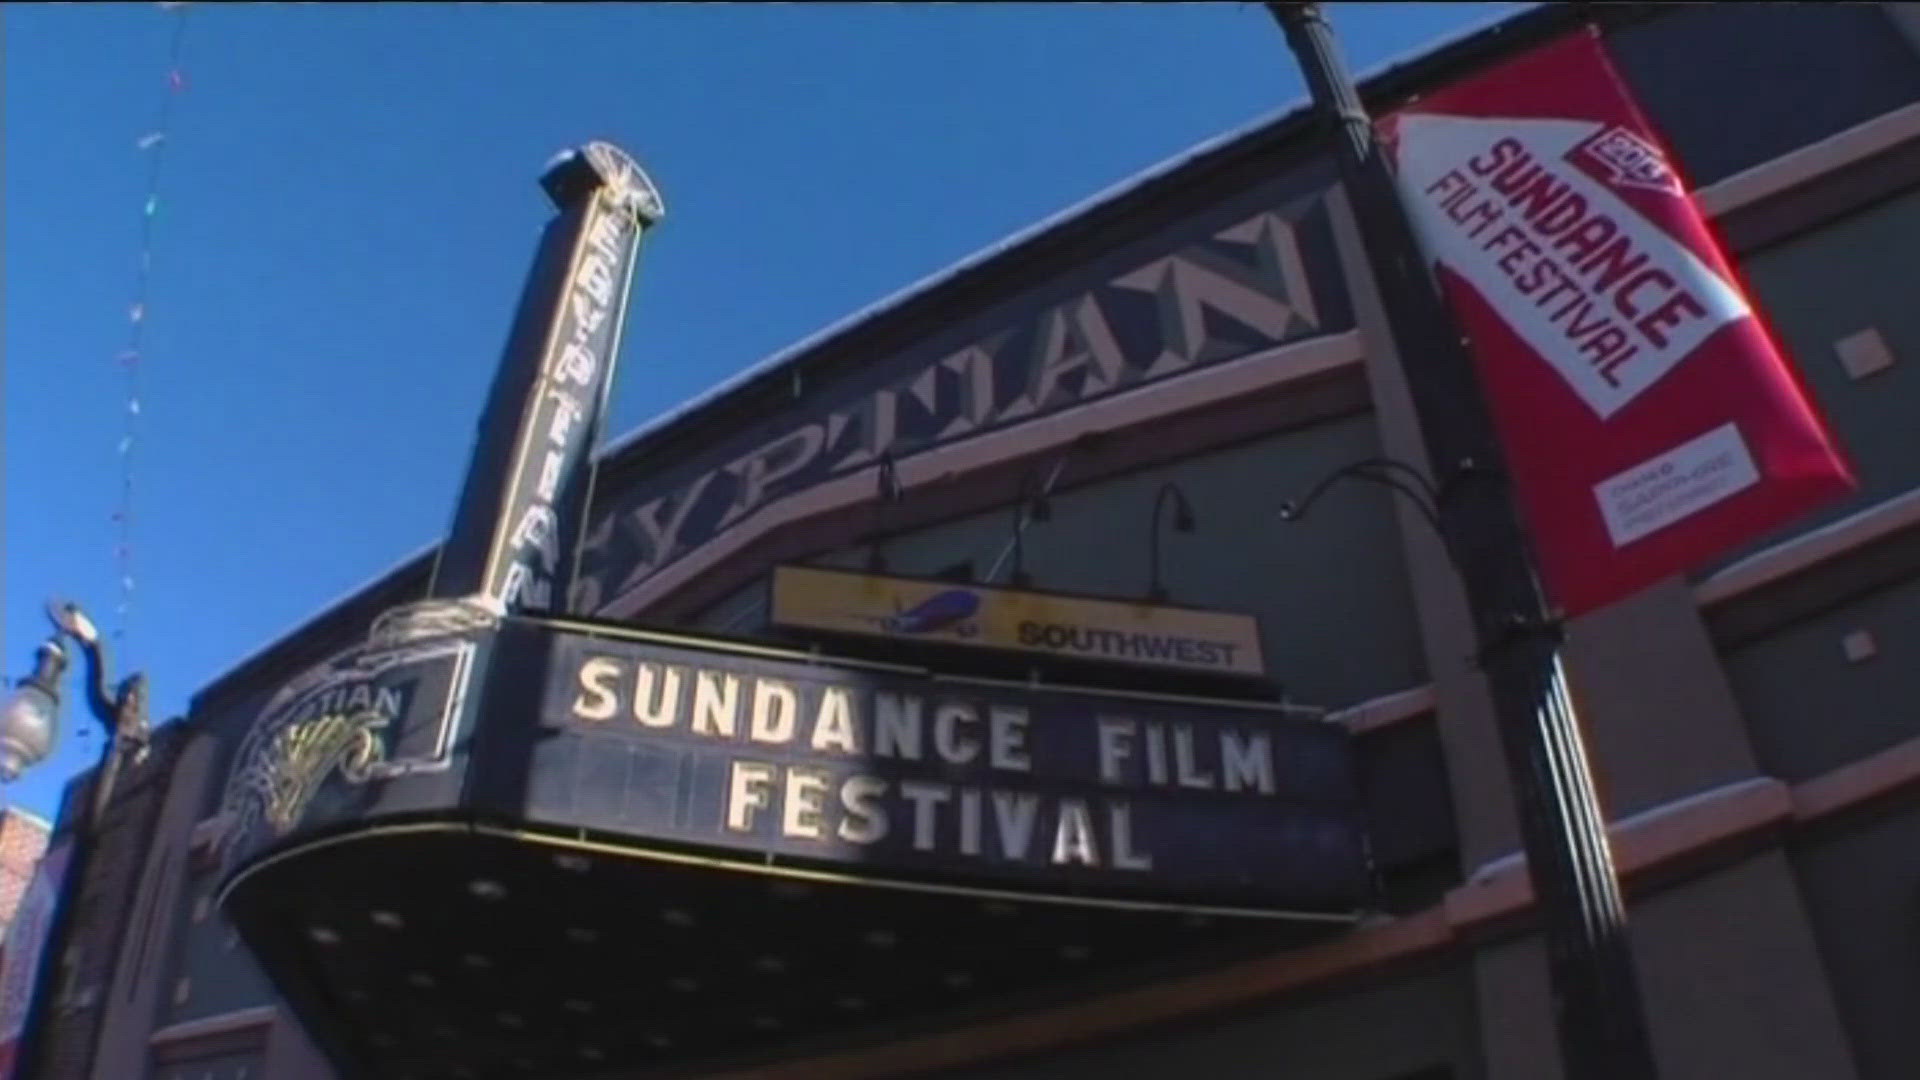 Sundance Film Festival announced it is exploring new locations for the 2027 festival.